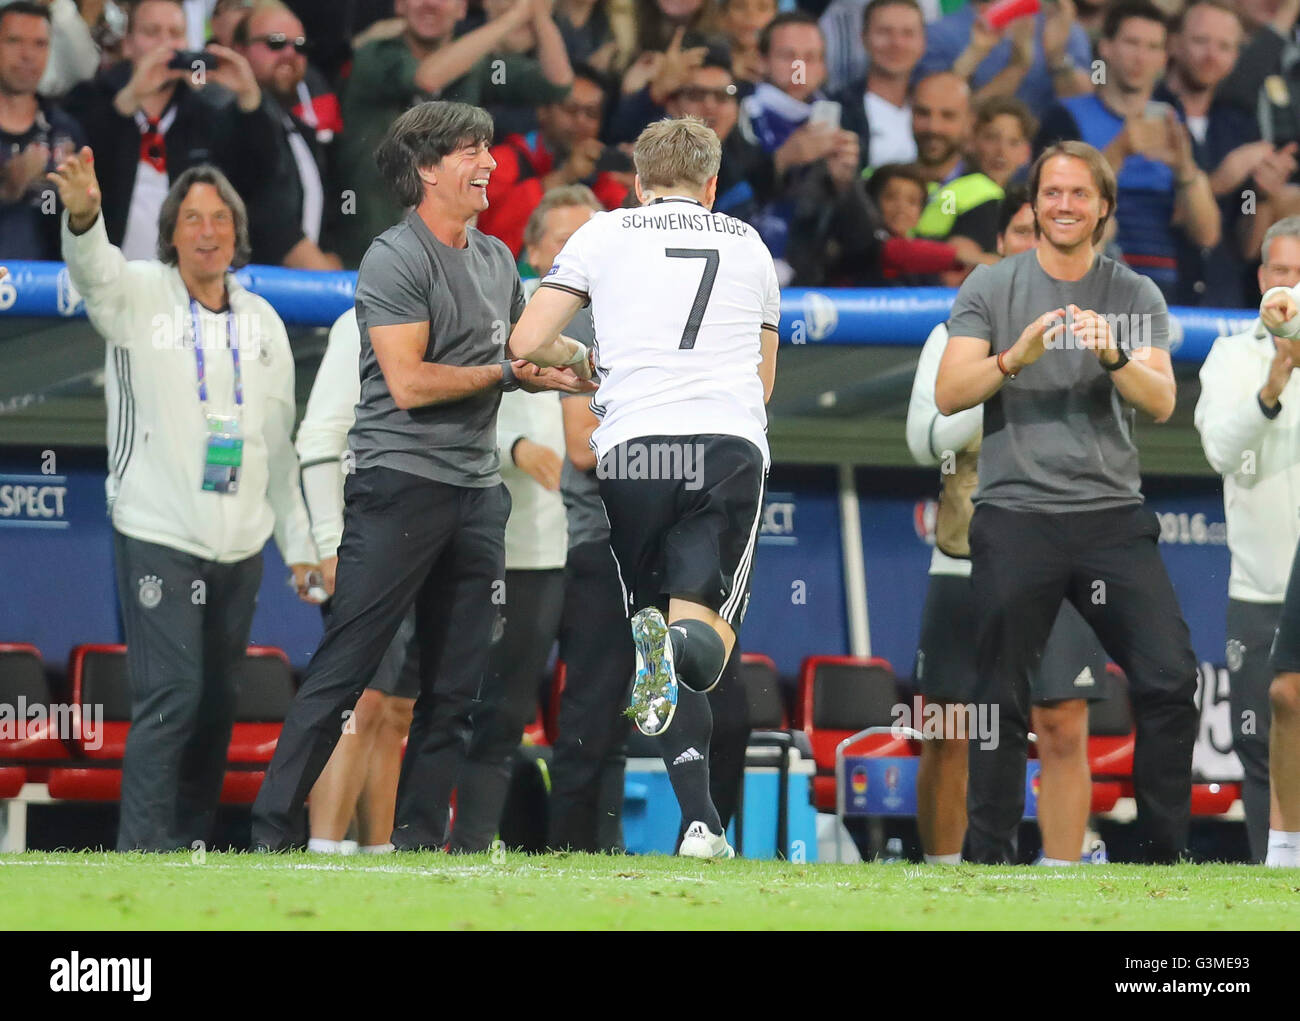 Lillie, France. 12th June, 2016. Bastian SCHWEINSTEIGER, DFB 7  celebrates  celebration, his goal with  DFB coach Joachim Jogi LOEW, LÖW, and Thomas SCHNEIDER, DFB , assistent coach GERMANY - UKRAINE 2-0  Group C, Football European Championships at 12th June 2016 in Lille,France. Credit:  Peter Schatz / Alamy Live News Stock Photo